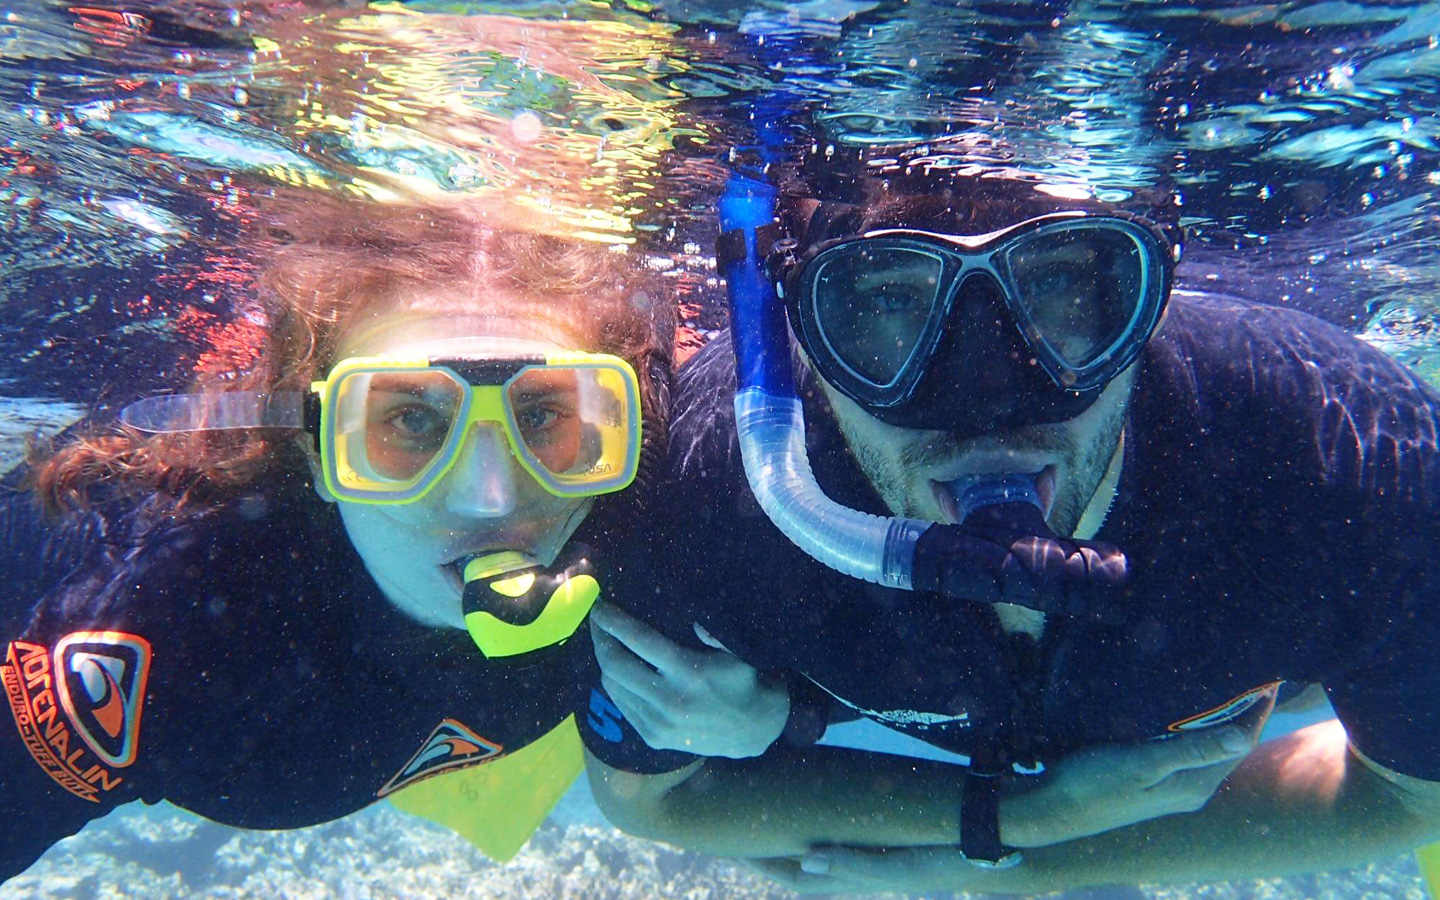 melissa carne and sam gill snorkelling in the great barrier reef in australia